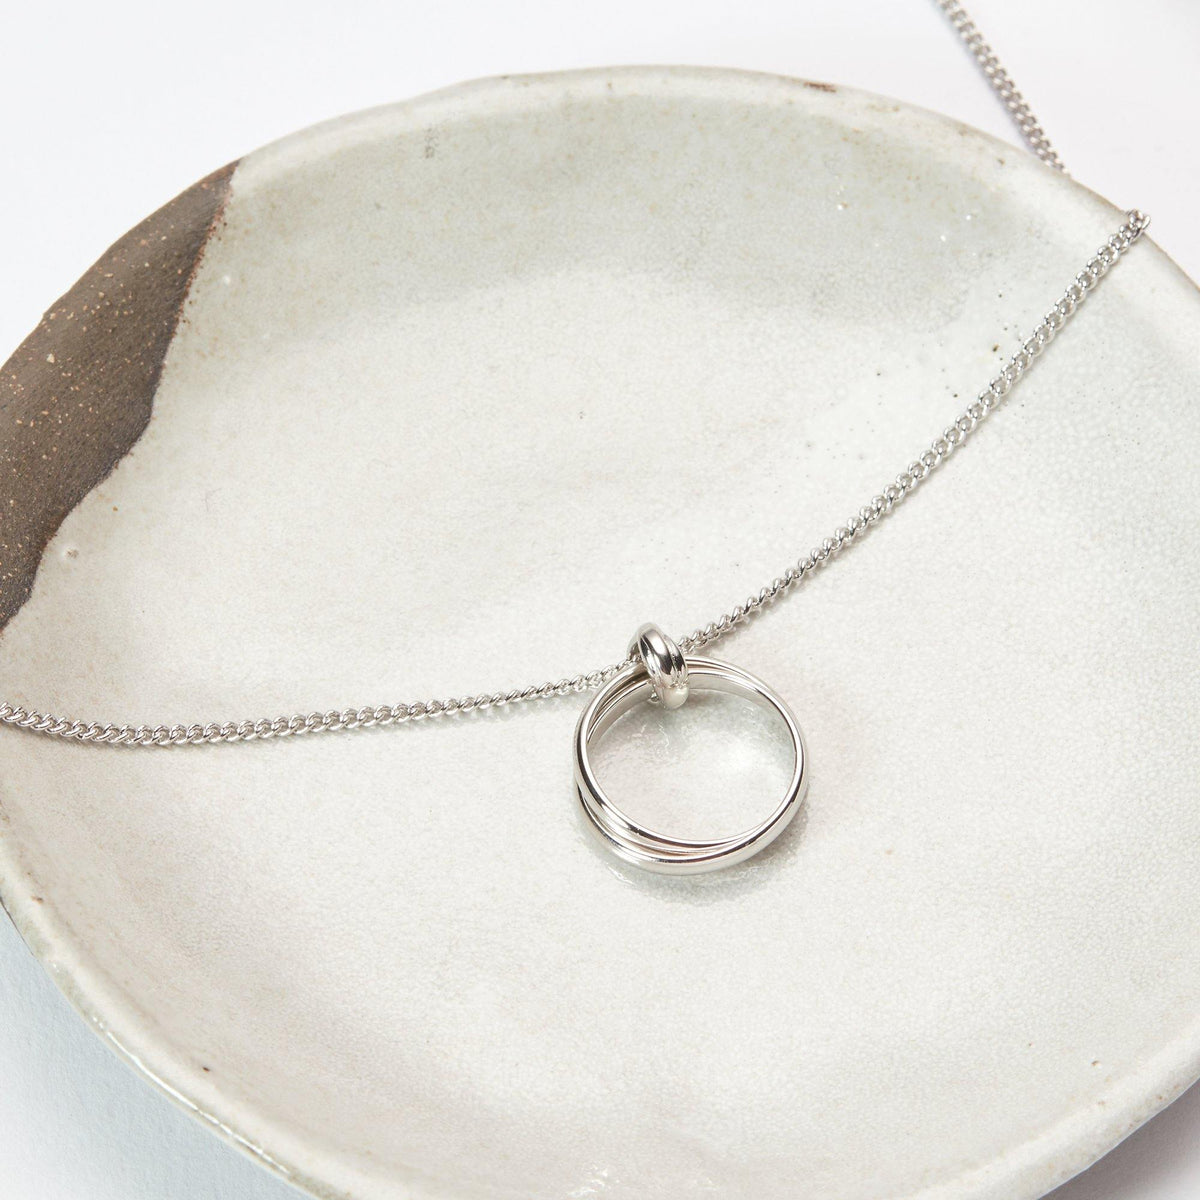 Christmas Gift for Wife Necklace - Dear Ava, Jewelry / Necklaces / Pendants